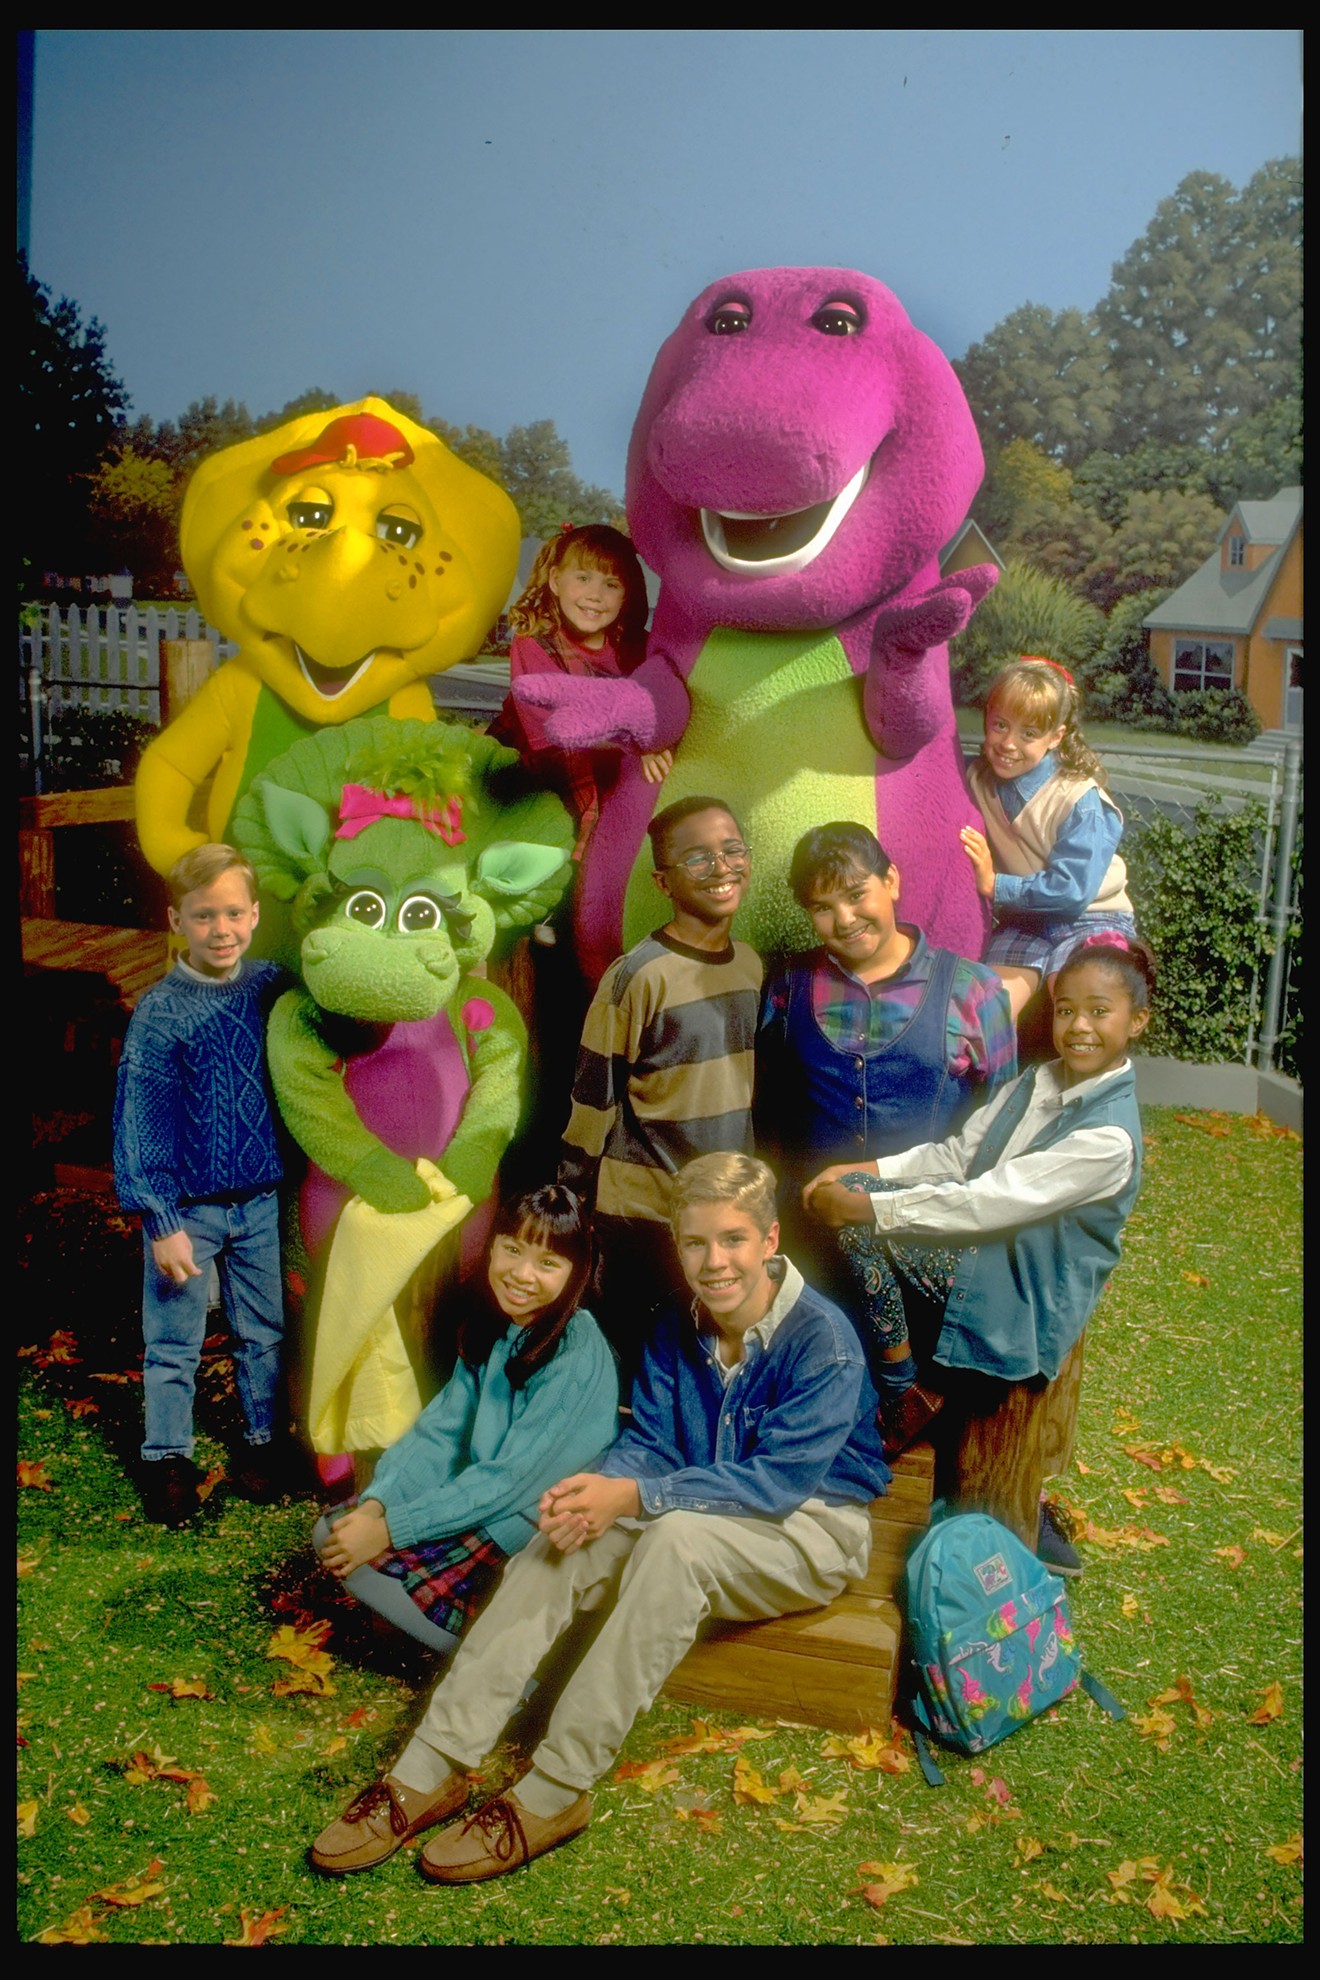 A press photo from the PBS TV series Barney & Friends in the early 1990s.